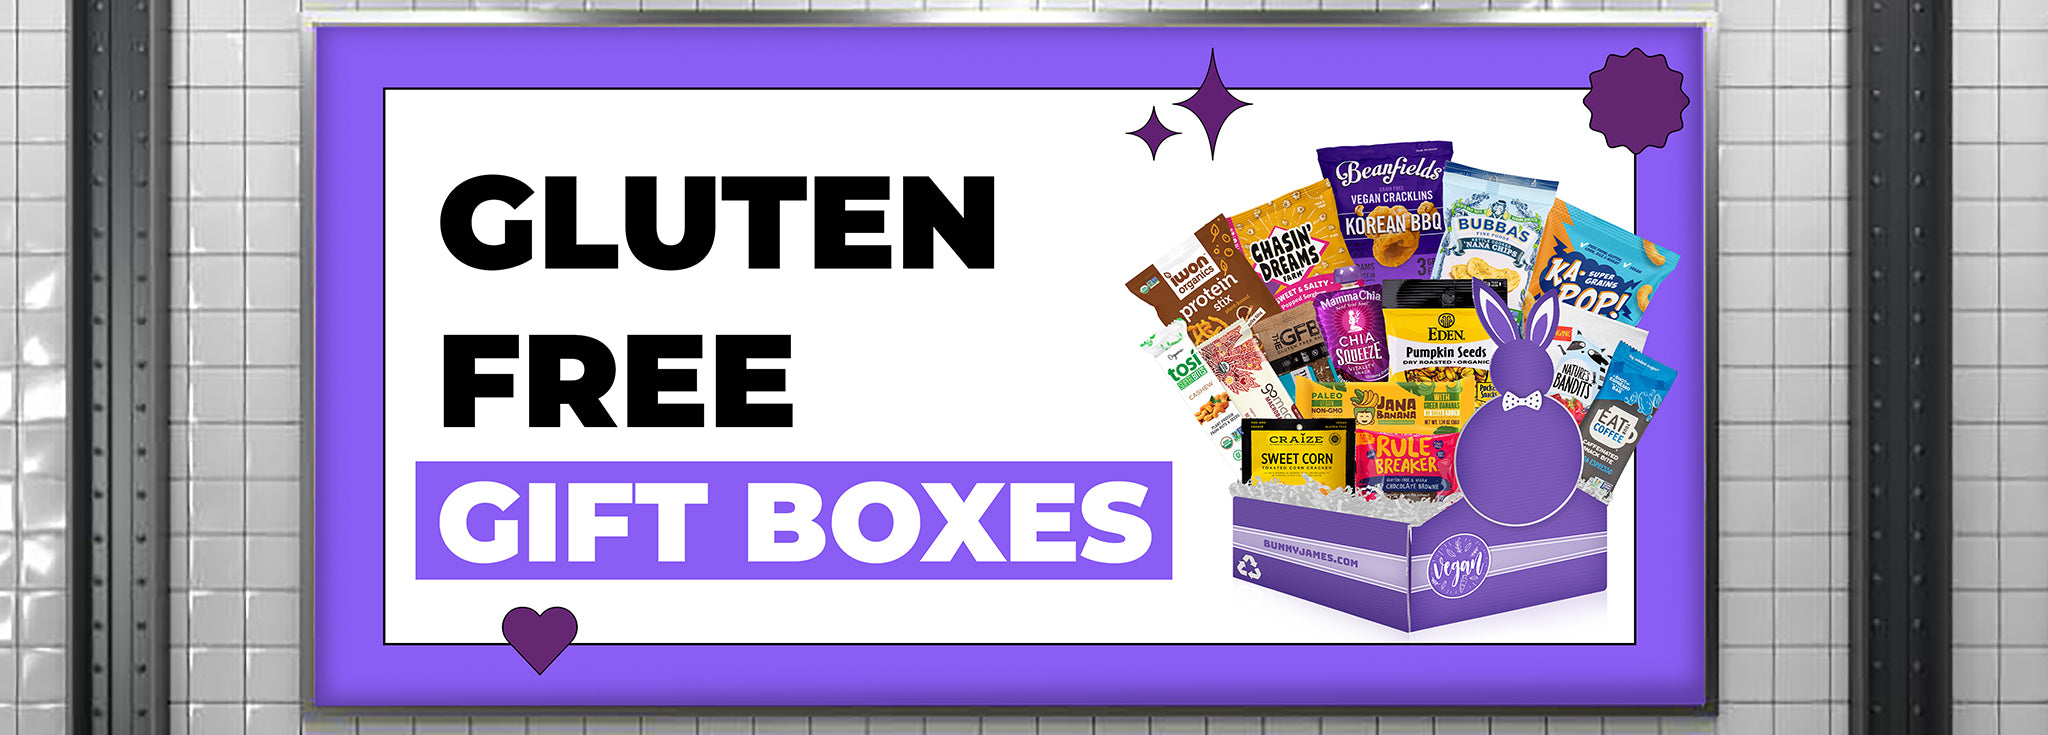 All Gluten-Free Products